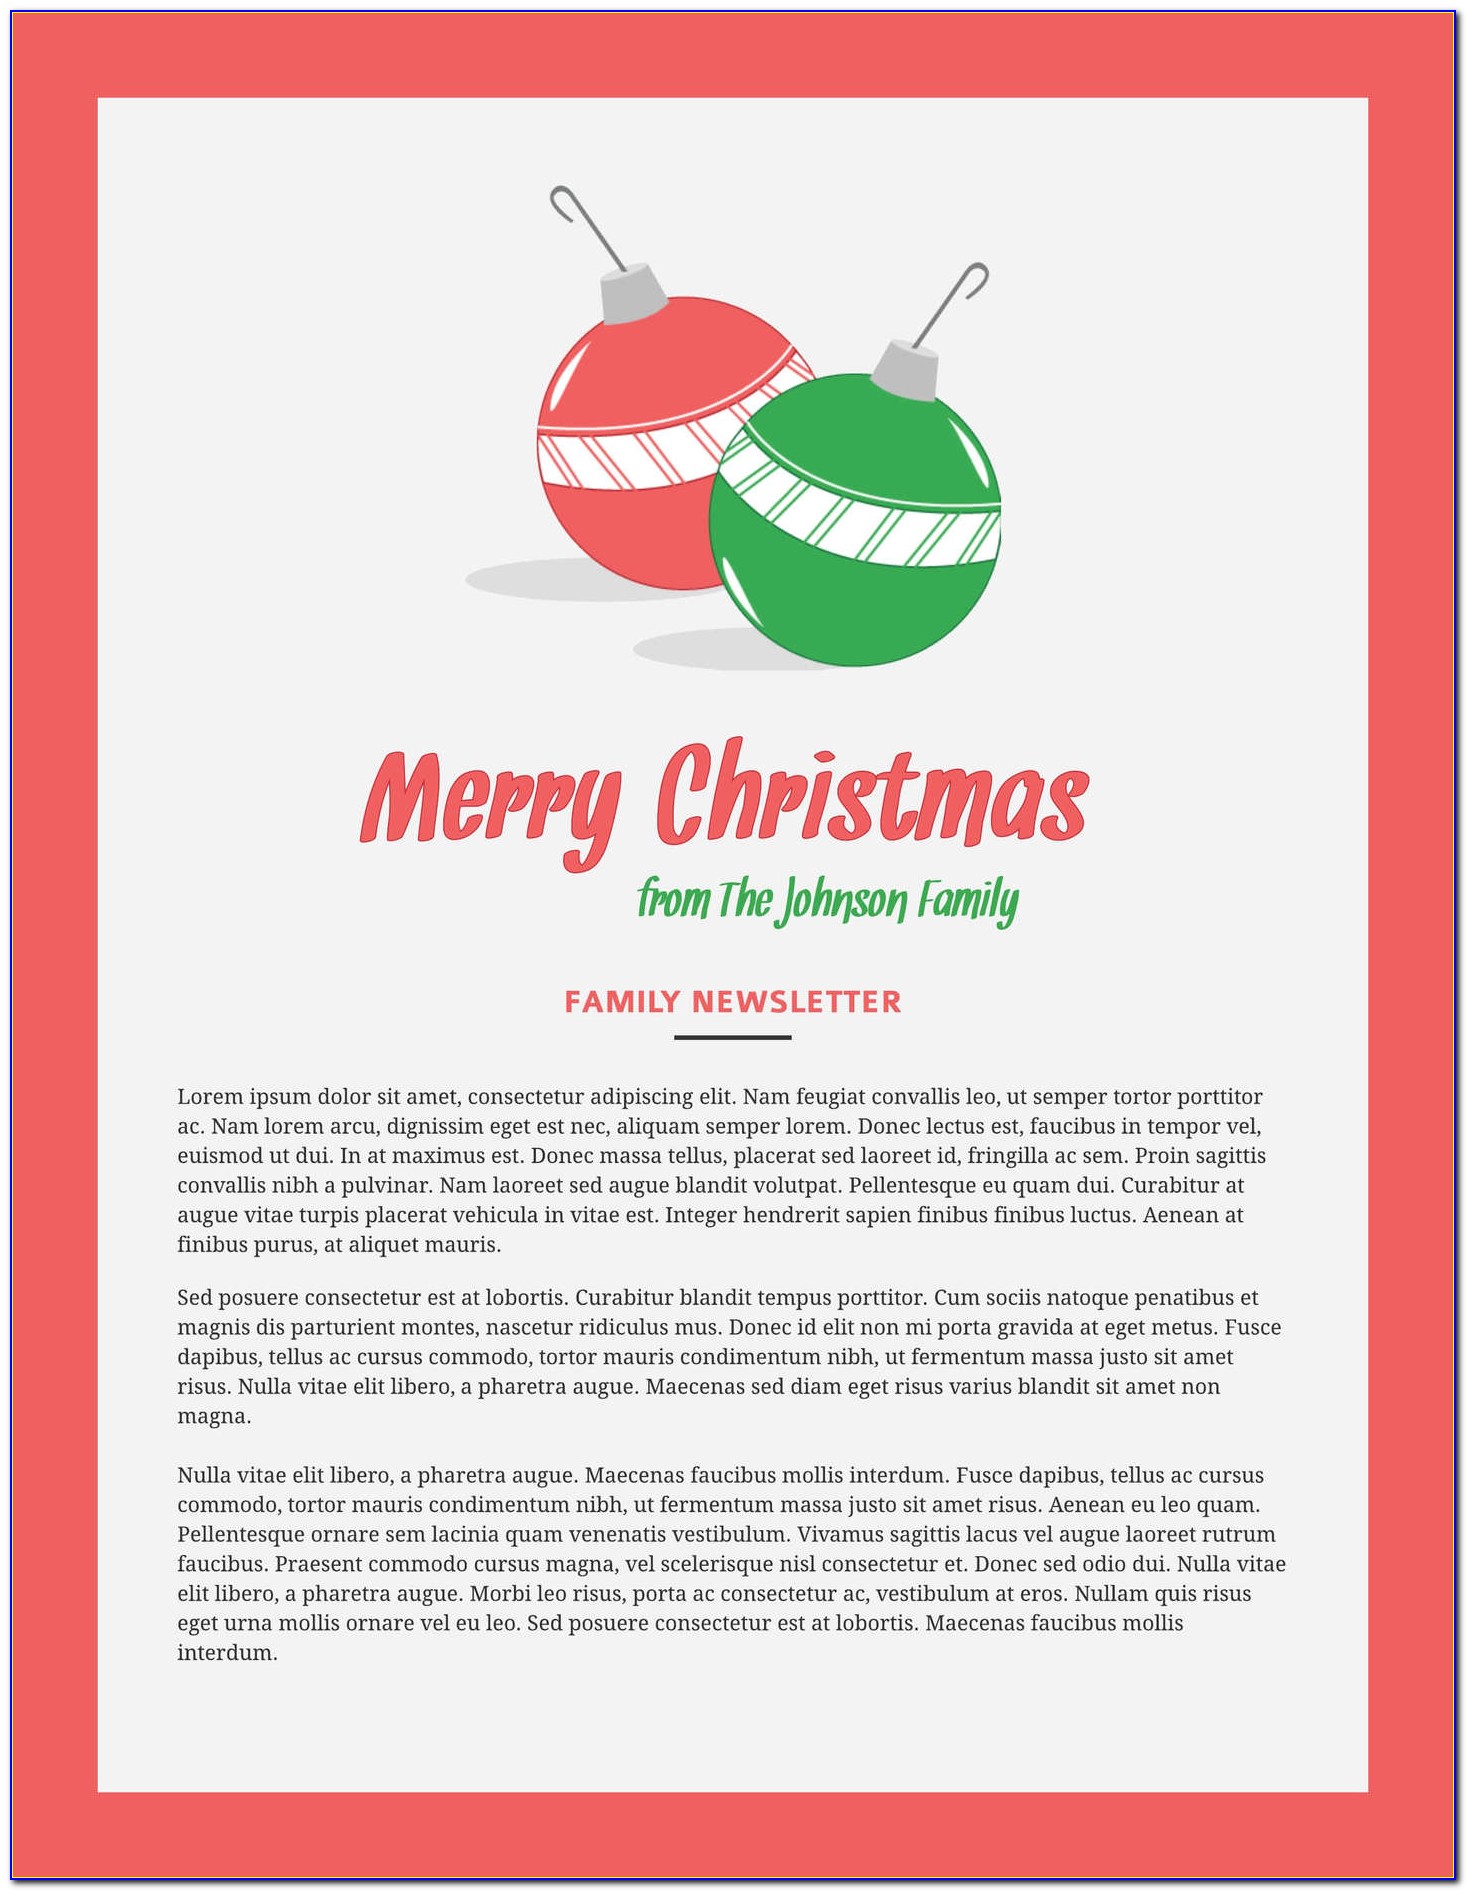 Free Holiday Newsletter Templates For Microsoft Word